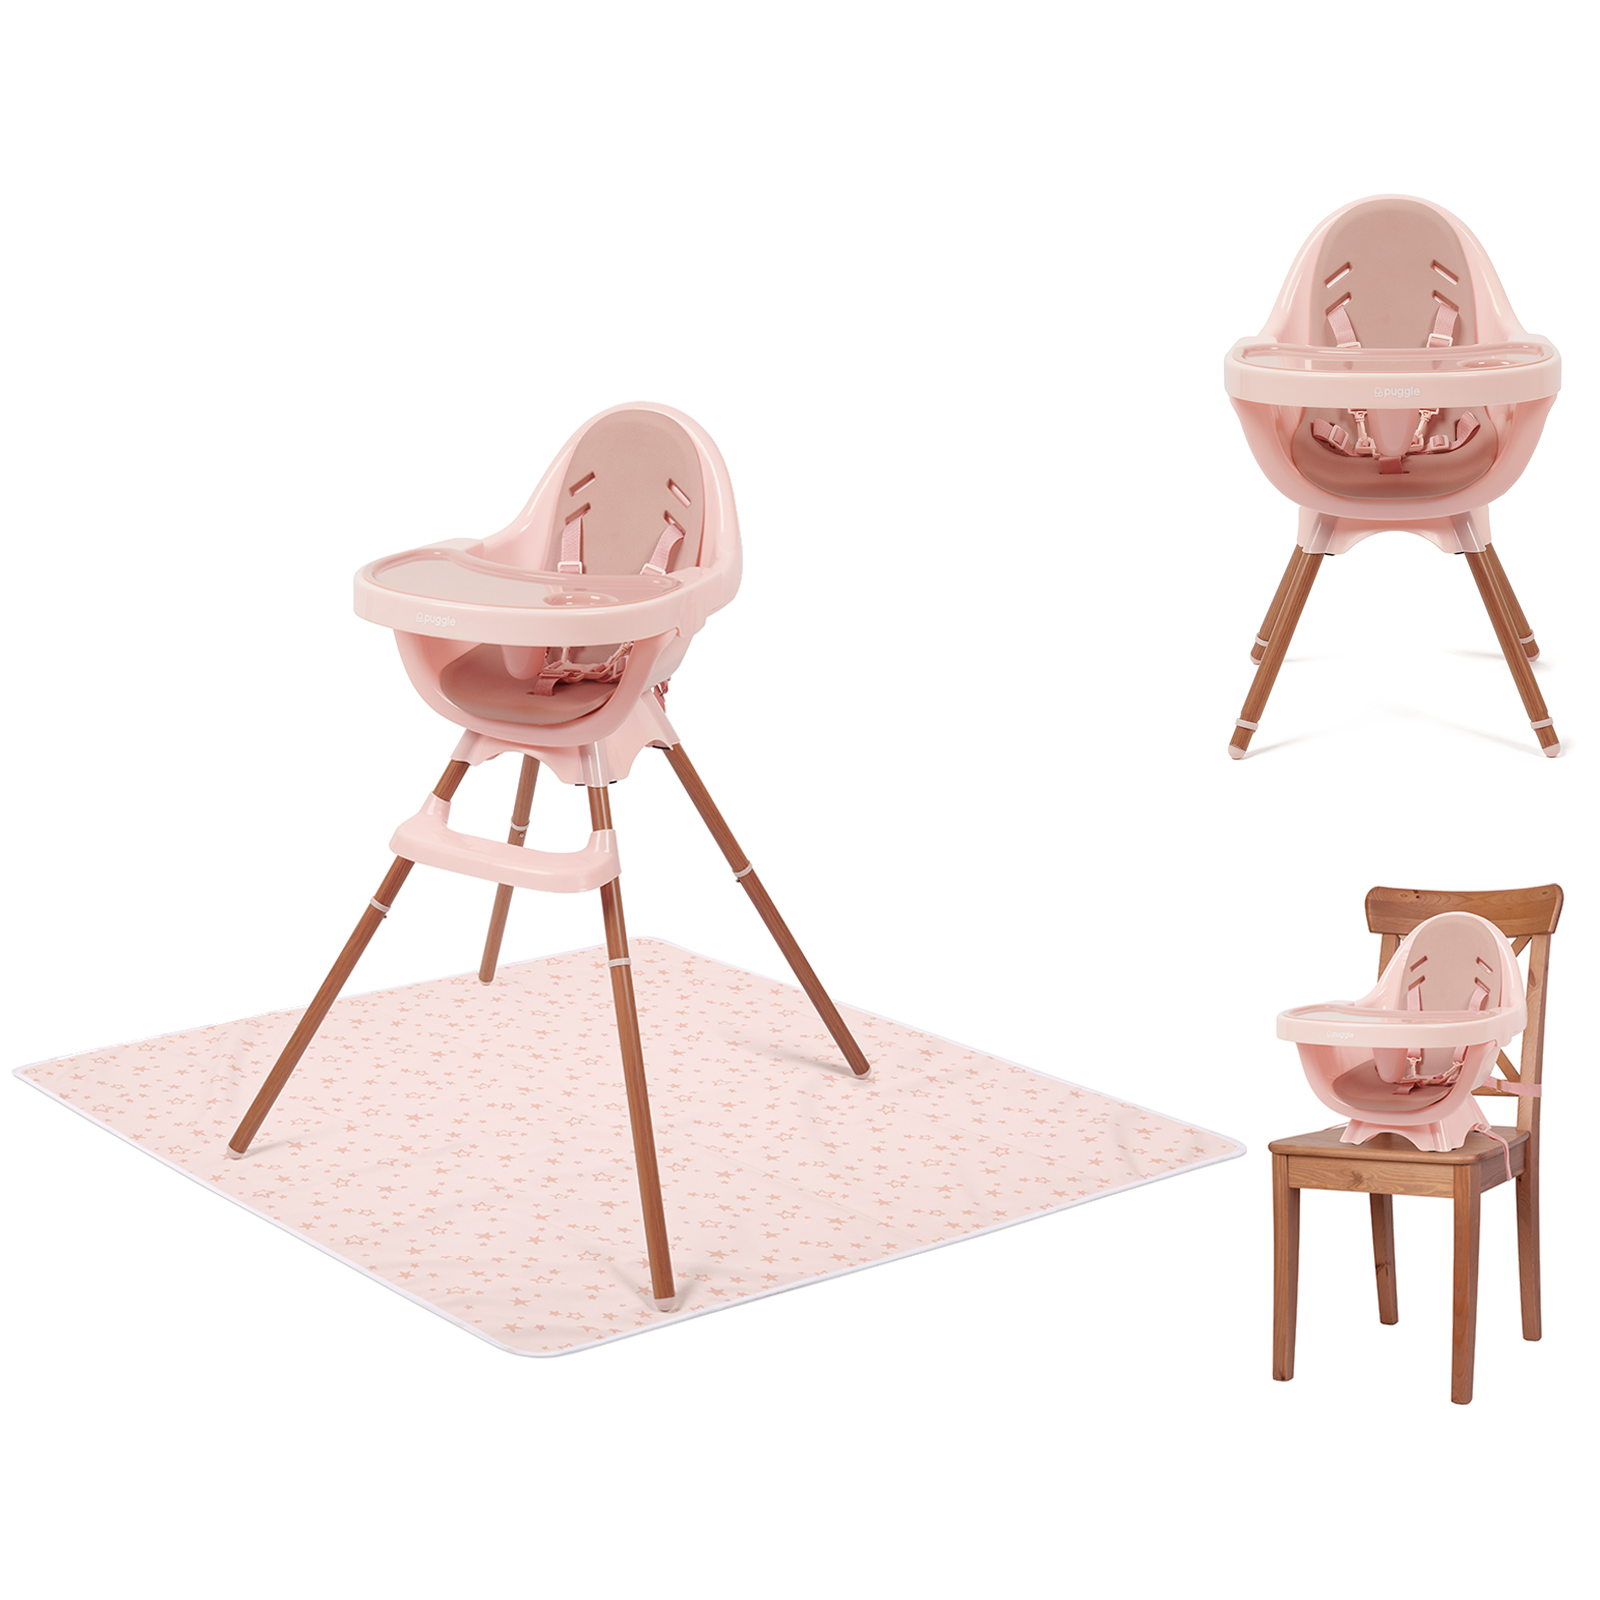 Puggle Munch Crunch 3in1 High/Low Chair & Booster Seat Special Edition with Splash Mat - Blush Pink